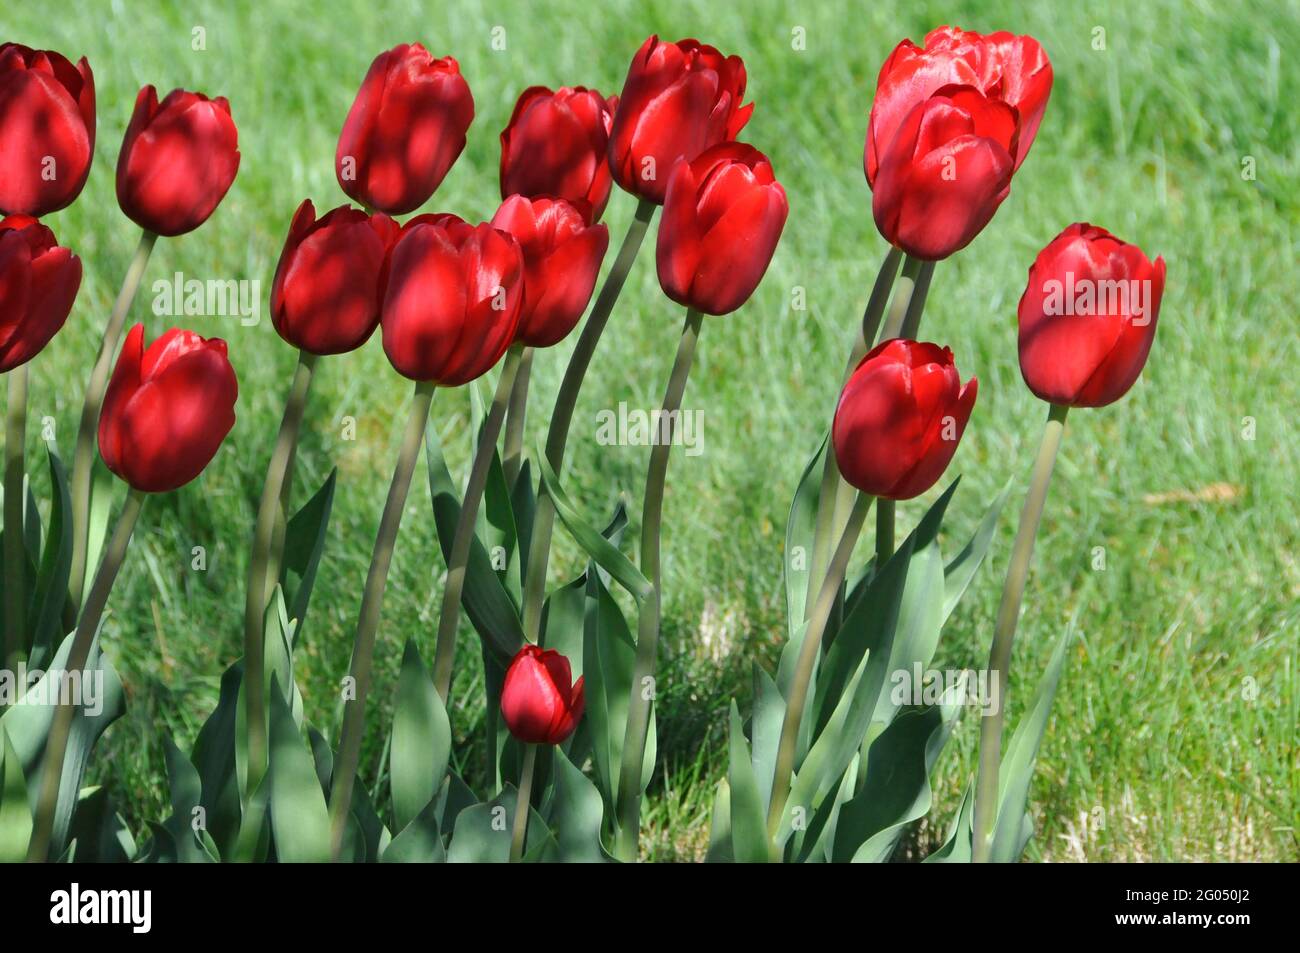 Bright Red Heartbreaker Tulips Growing Tall a Garden with Soft Triumph Petals and Beautiful Shadows Stock Photo